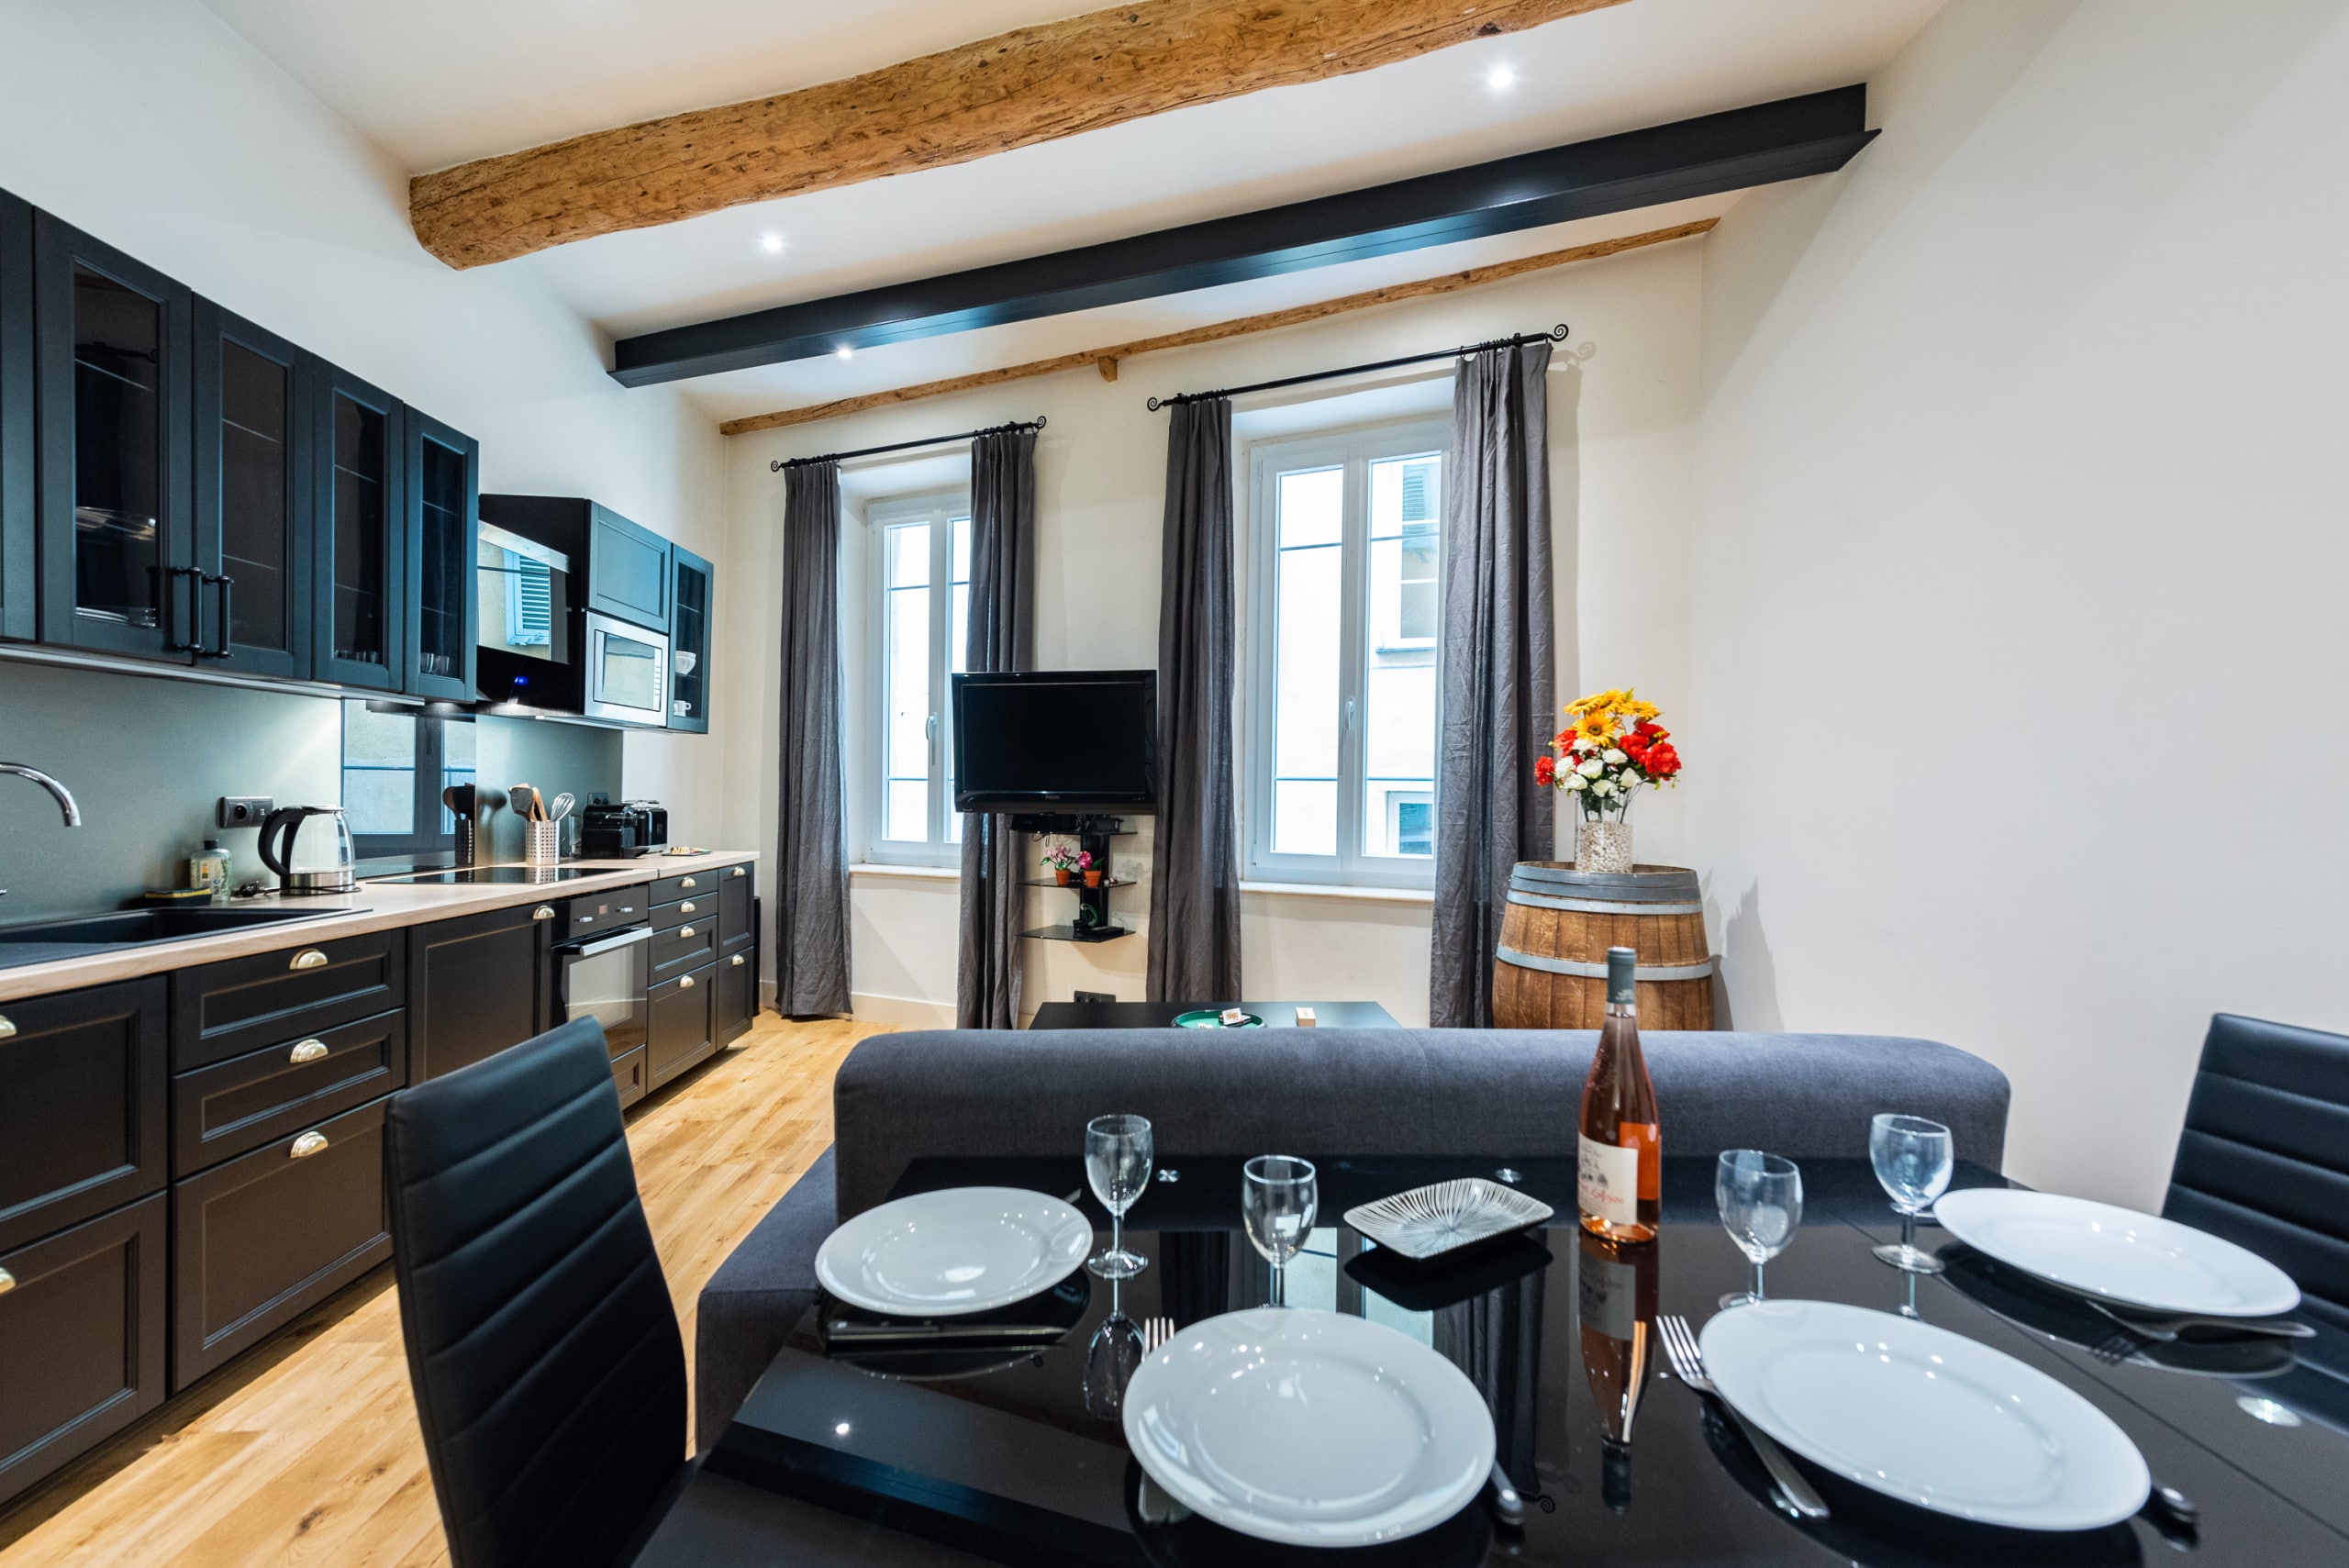 Property Image 1 - Stunning 1 bedroom flat in the heart of the old town